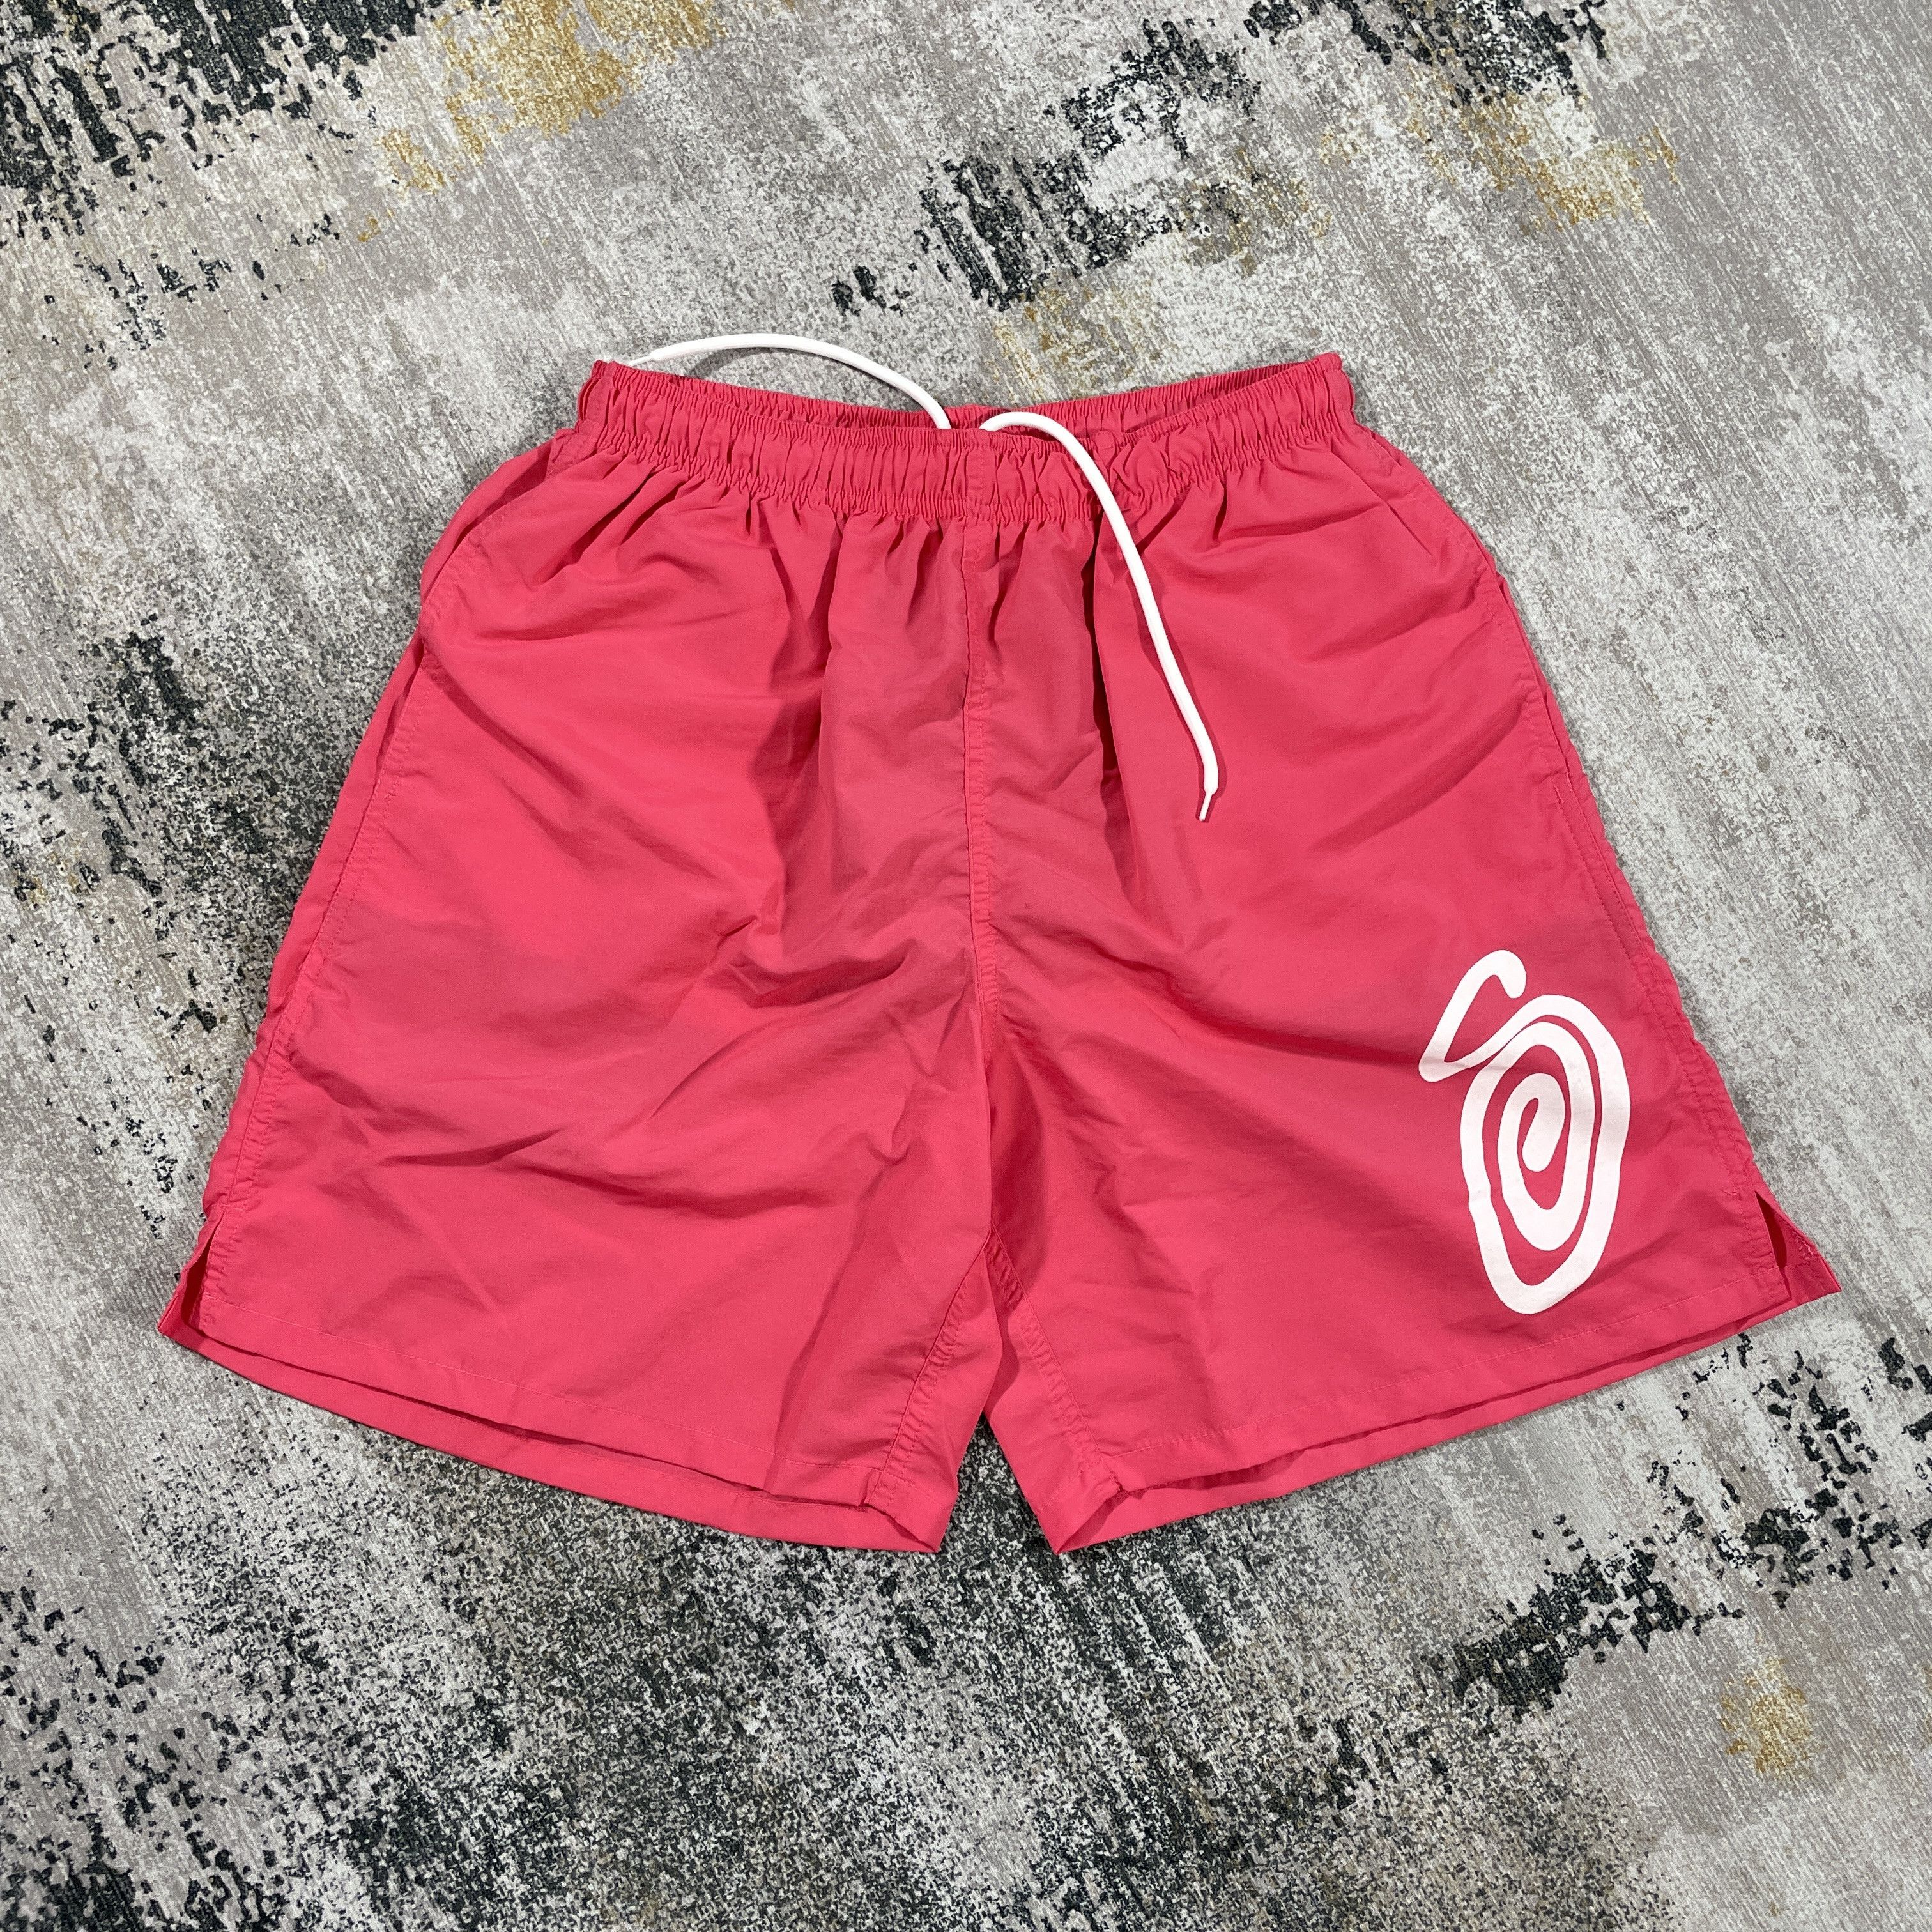 Stussy Stussy  CURLY S  Water Short Pink // L | Grailed